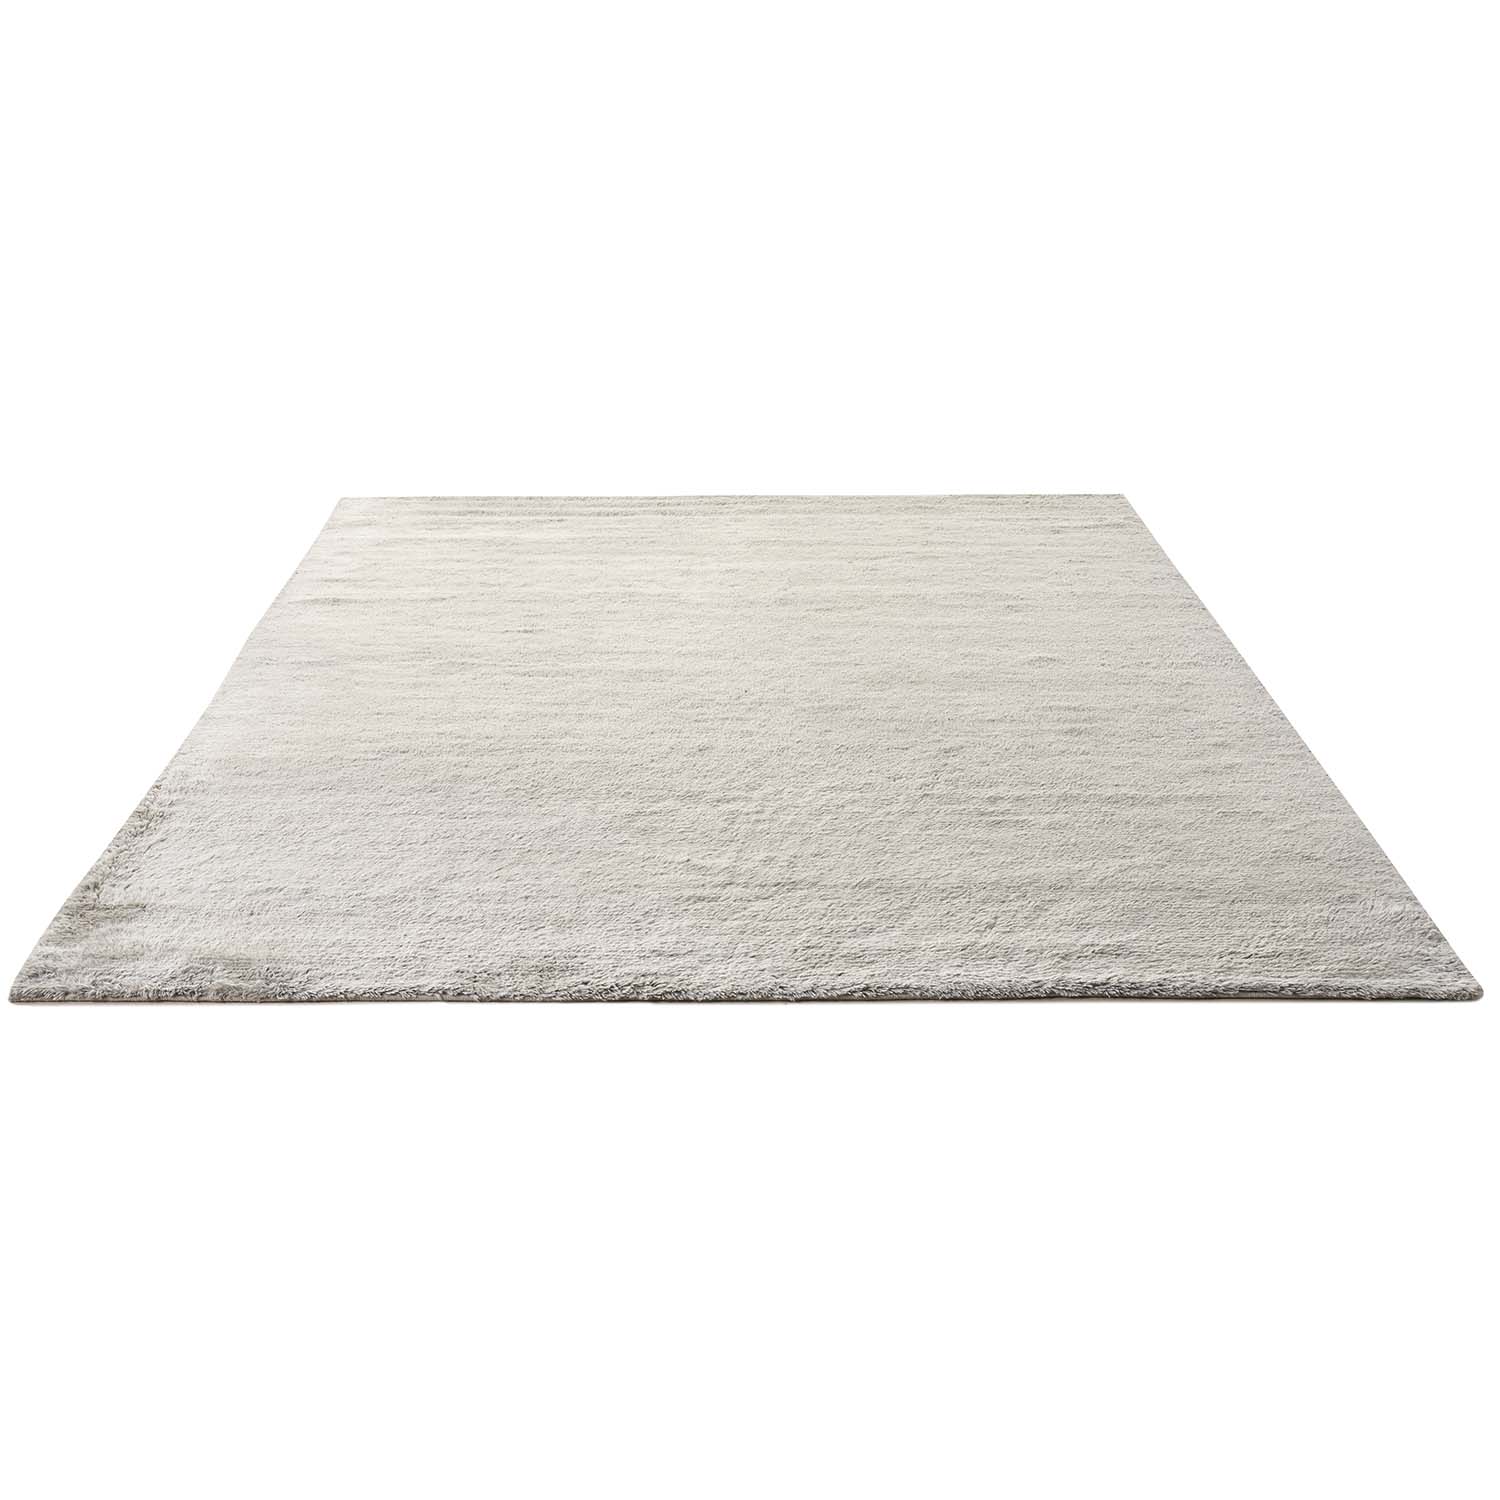 Simple, plain rug with soft texture in uniform light color.